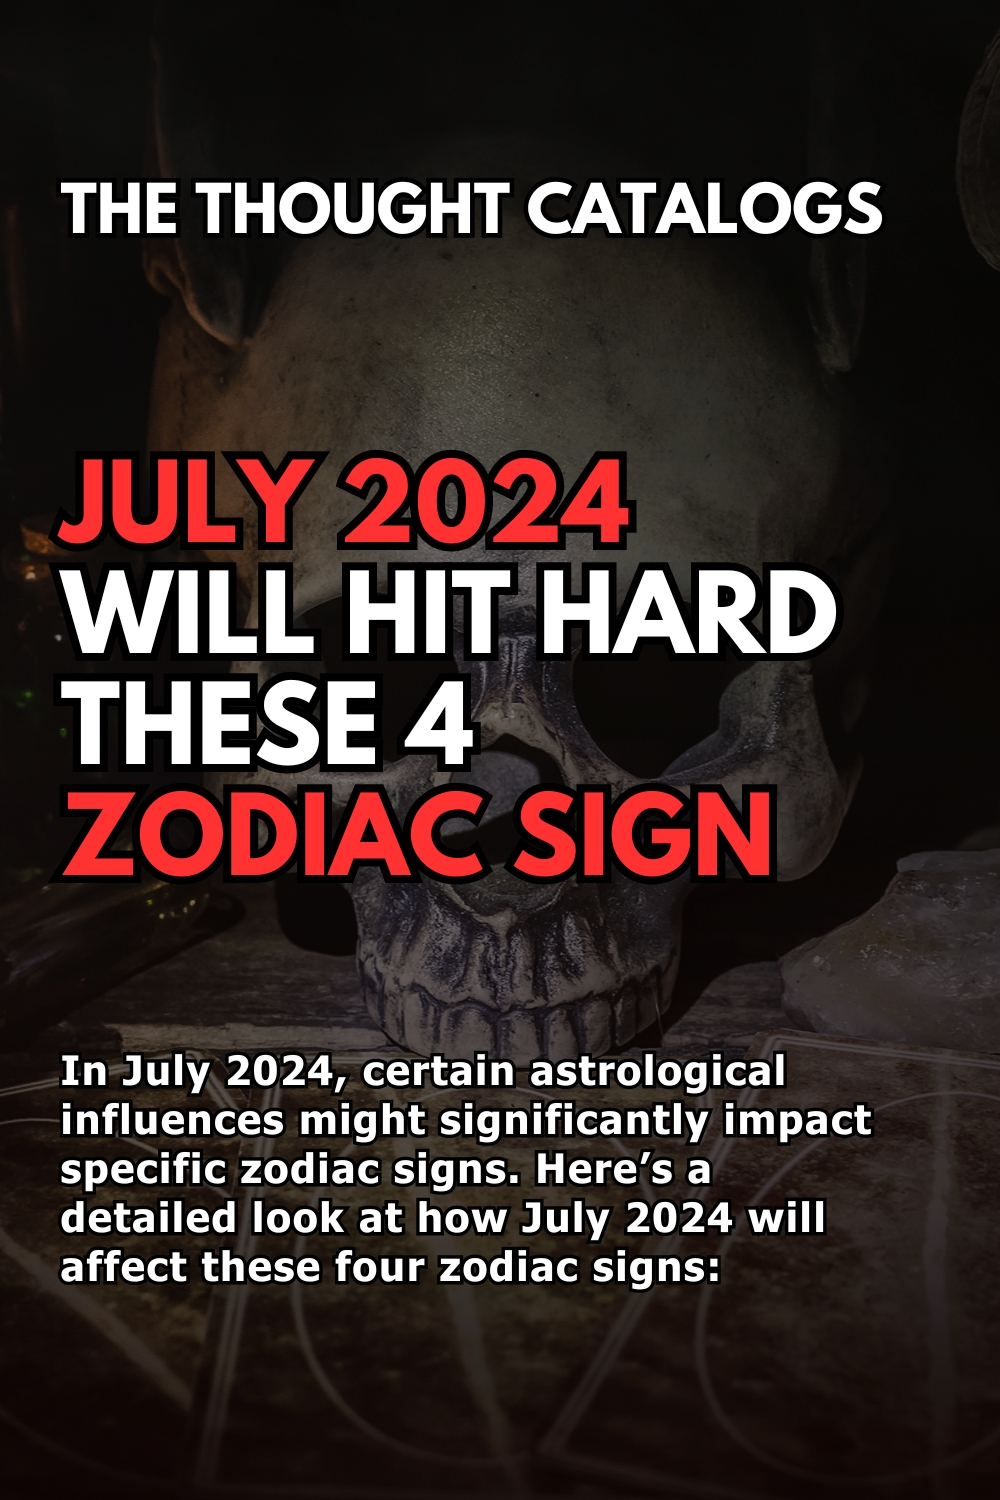 July 2024 Will Hit Hard These 4 Zodiac Sign